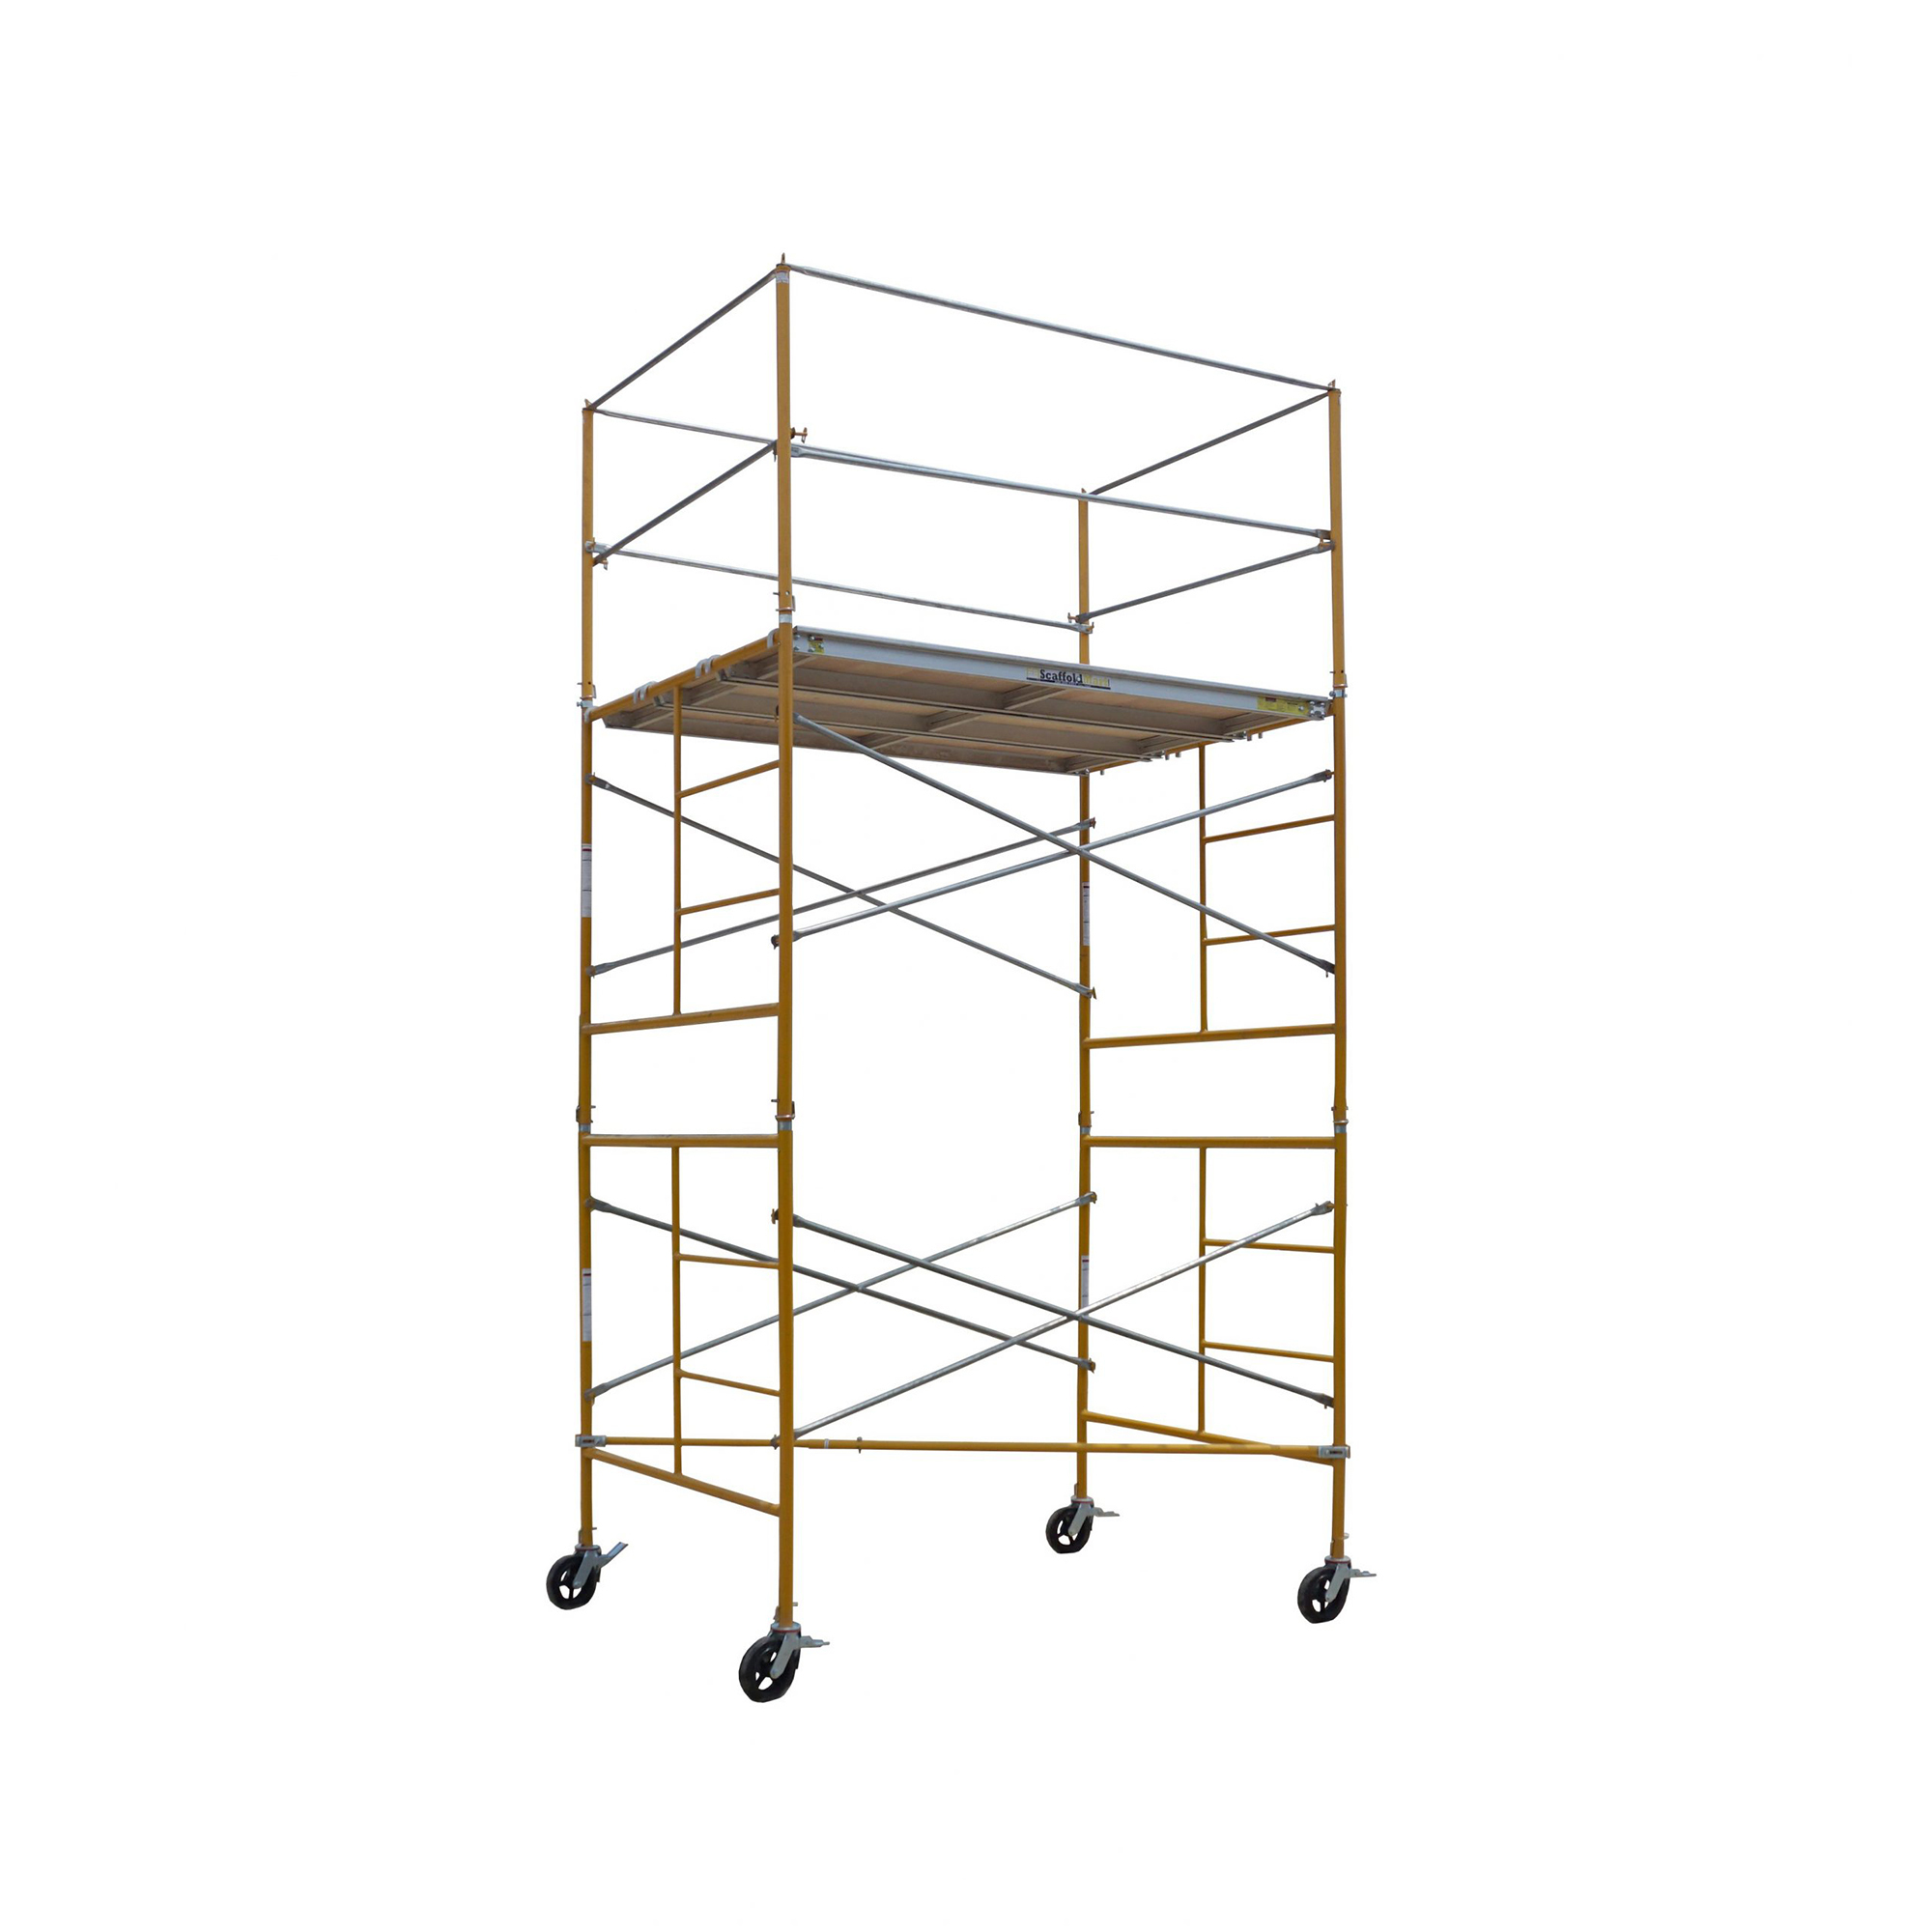 ScaffoldMart, 11ft. Rolling Tower Package, Capacity 2480 lb, Frame Material Steel, Max. Platform Height 11 ft, Model BB11R